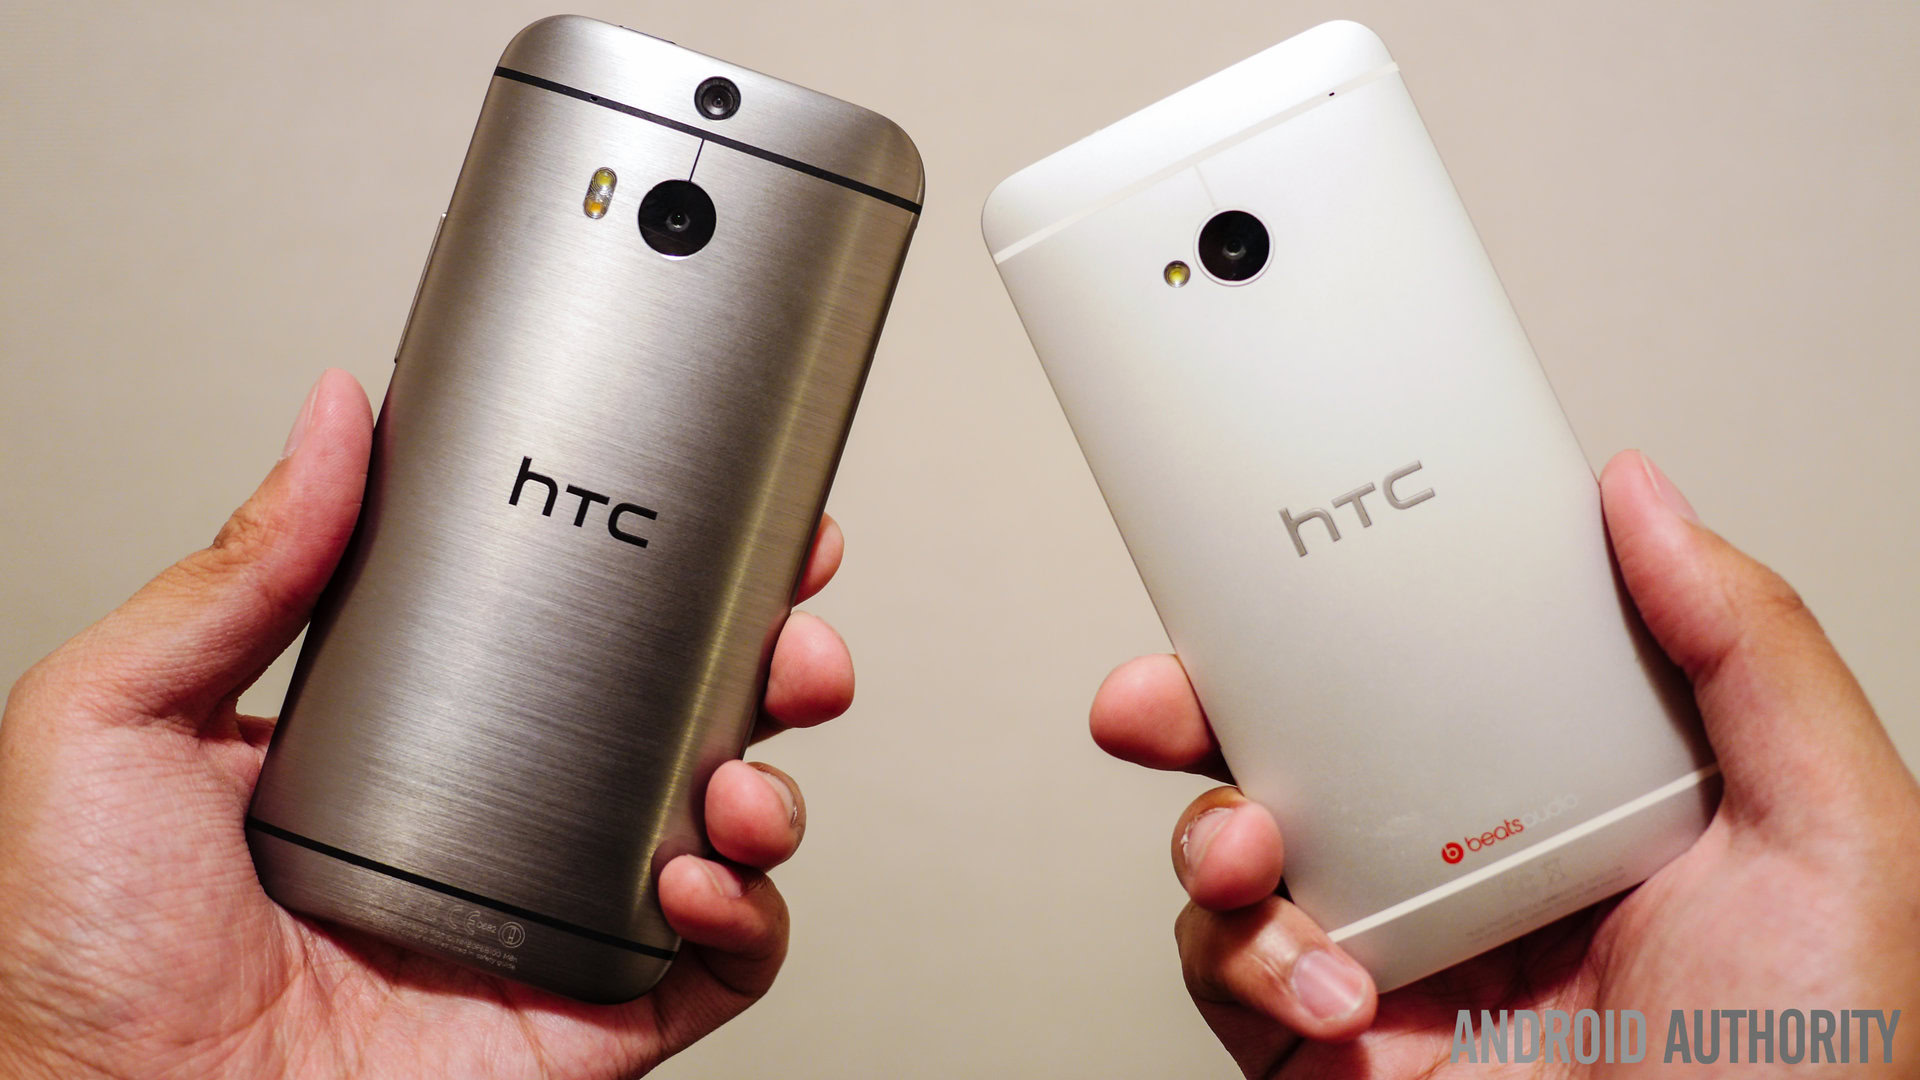 htc one m8 vs htc one m7 quick look aa handheld (6 of 6)